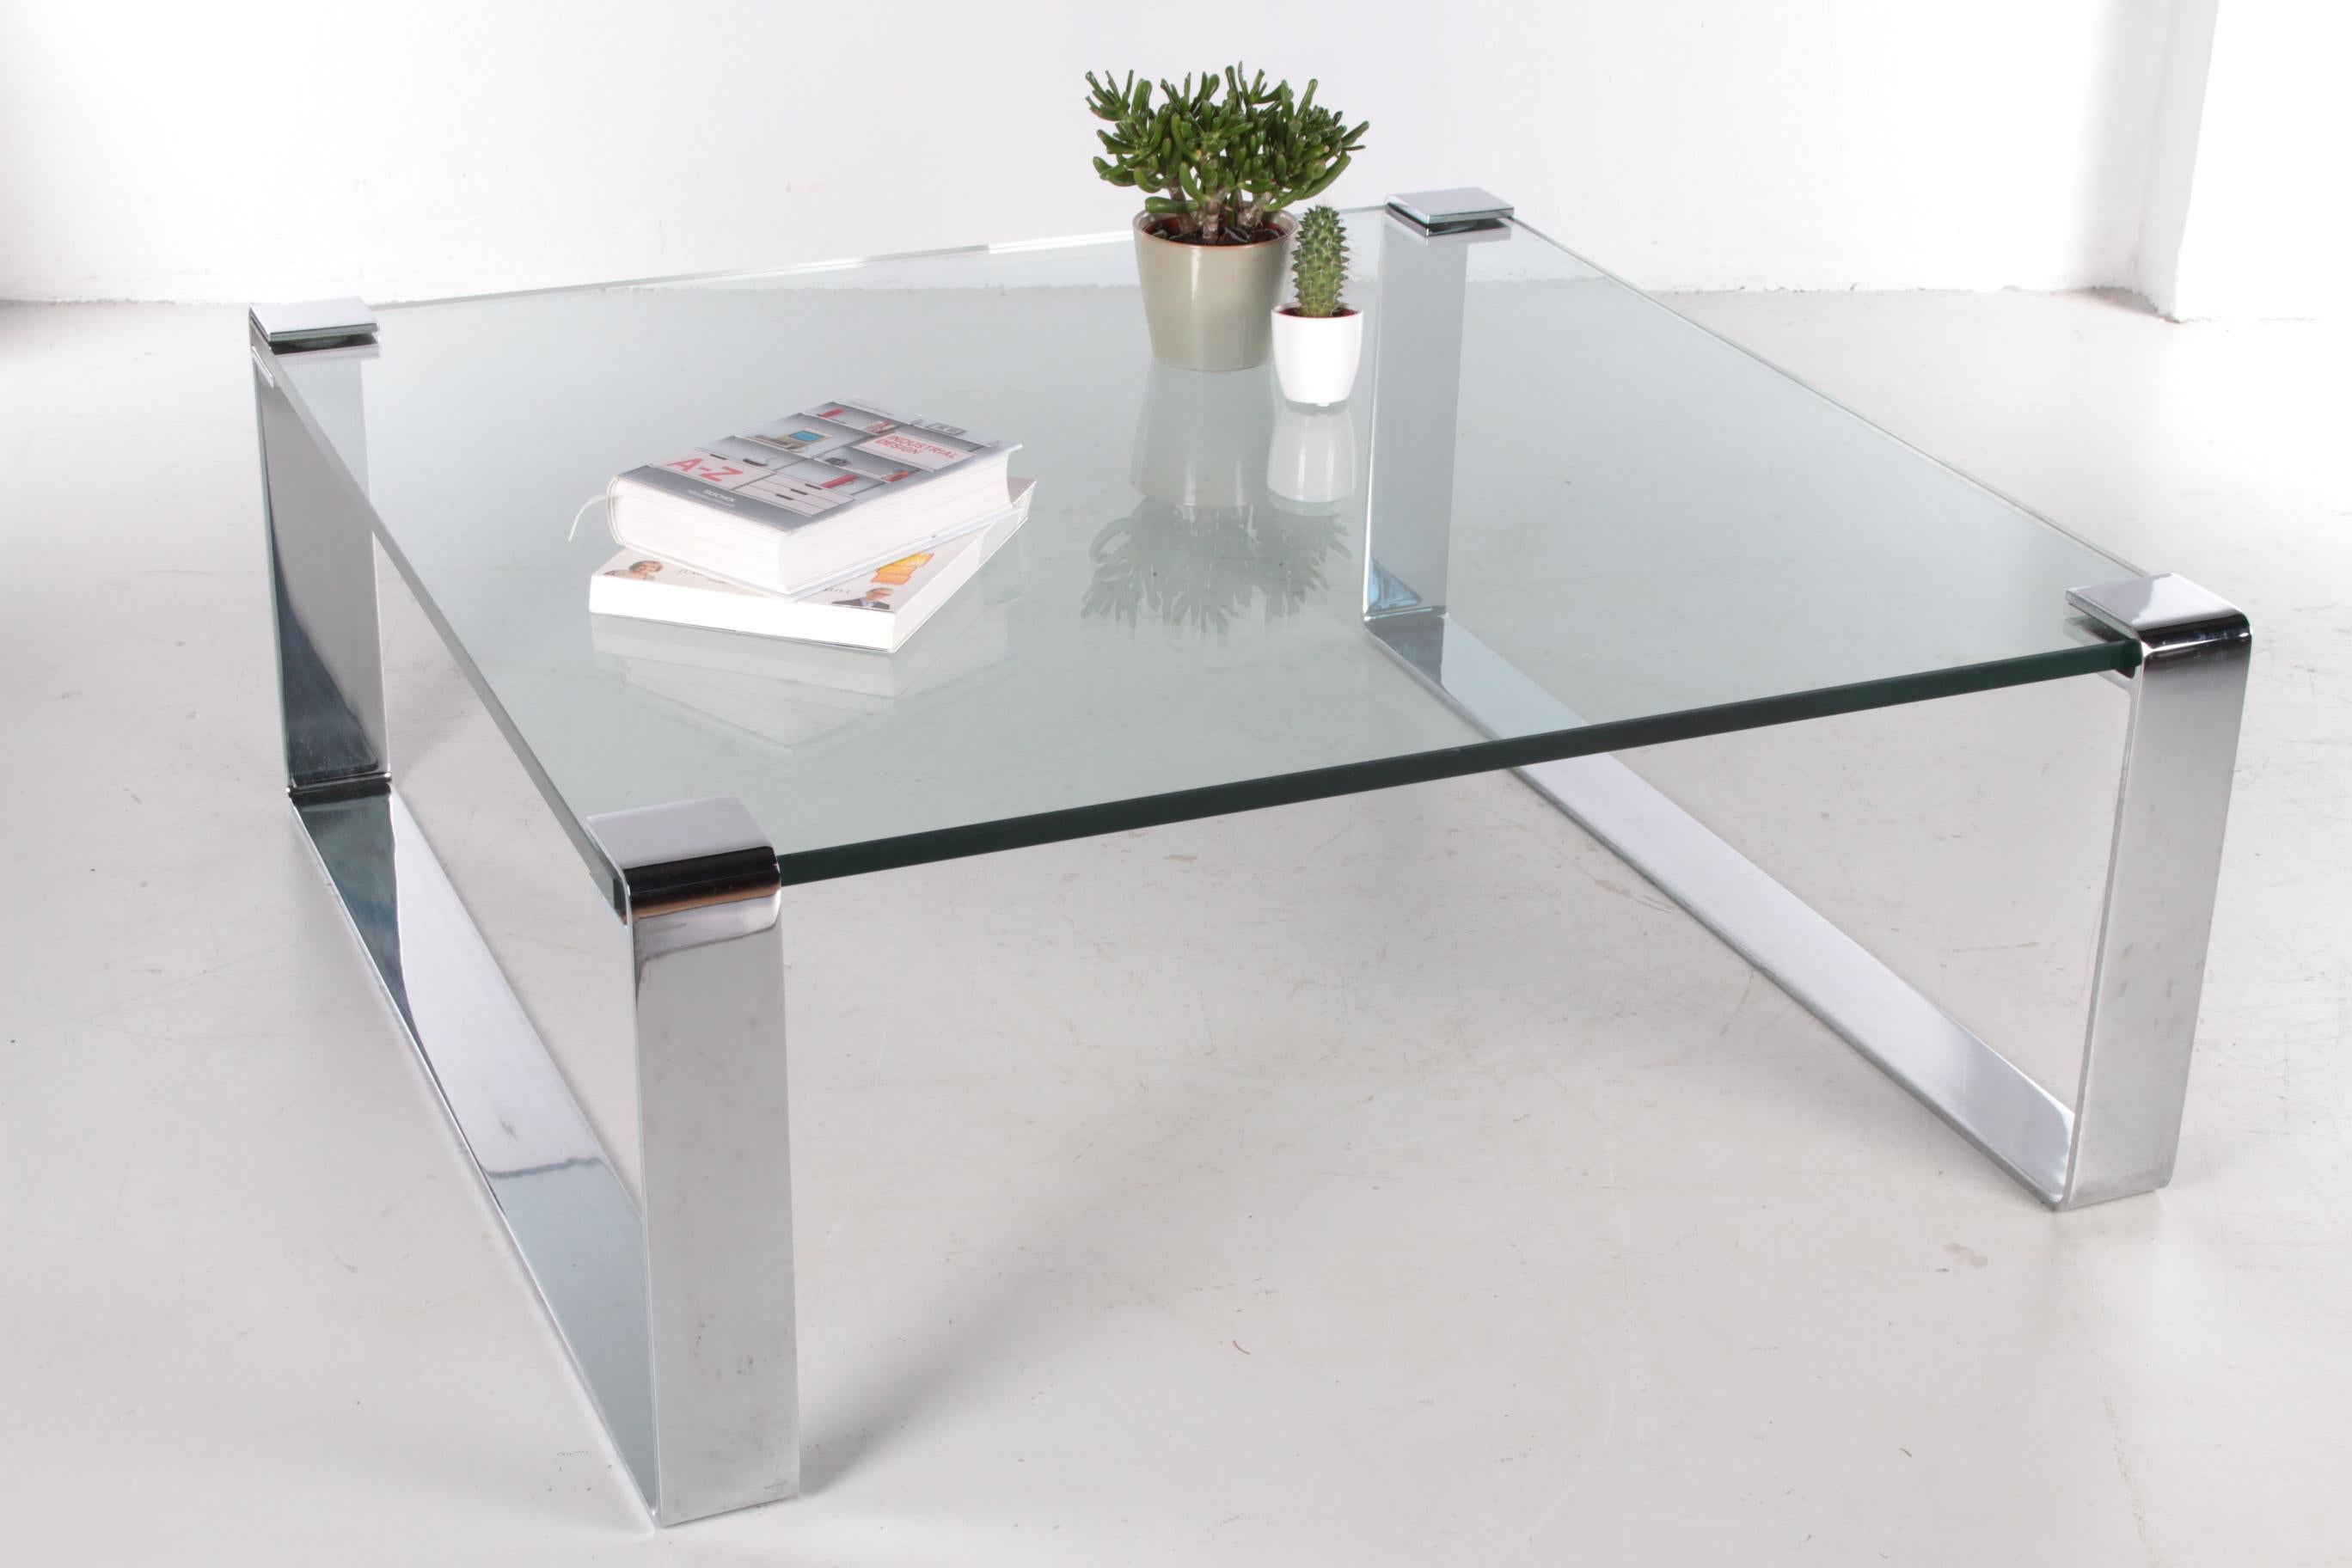 German chrome and glass coffee table Model Klassik 1022 Van Peter Draenert, 1960s

This famous coffee table is probably the first frameless table in the history of modern design.

It consists of a 19 mm thick glass table top and steel clamping